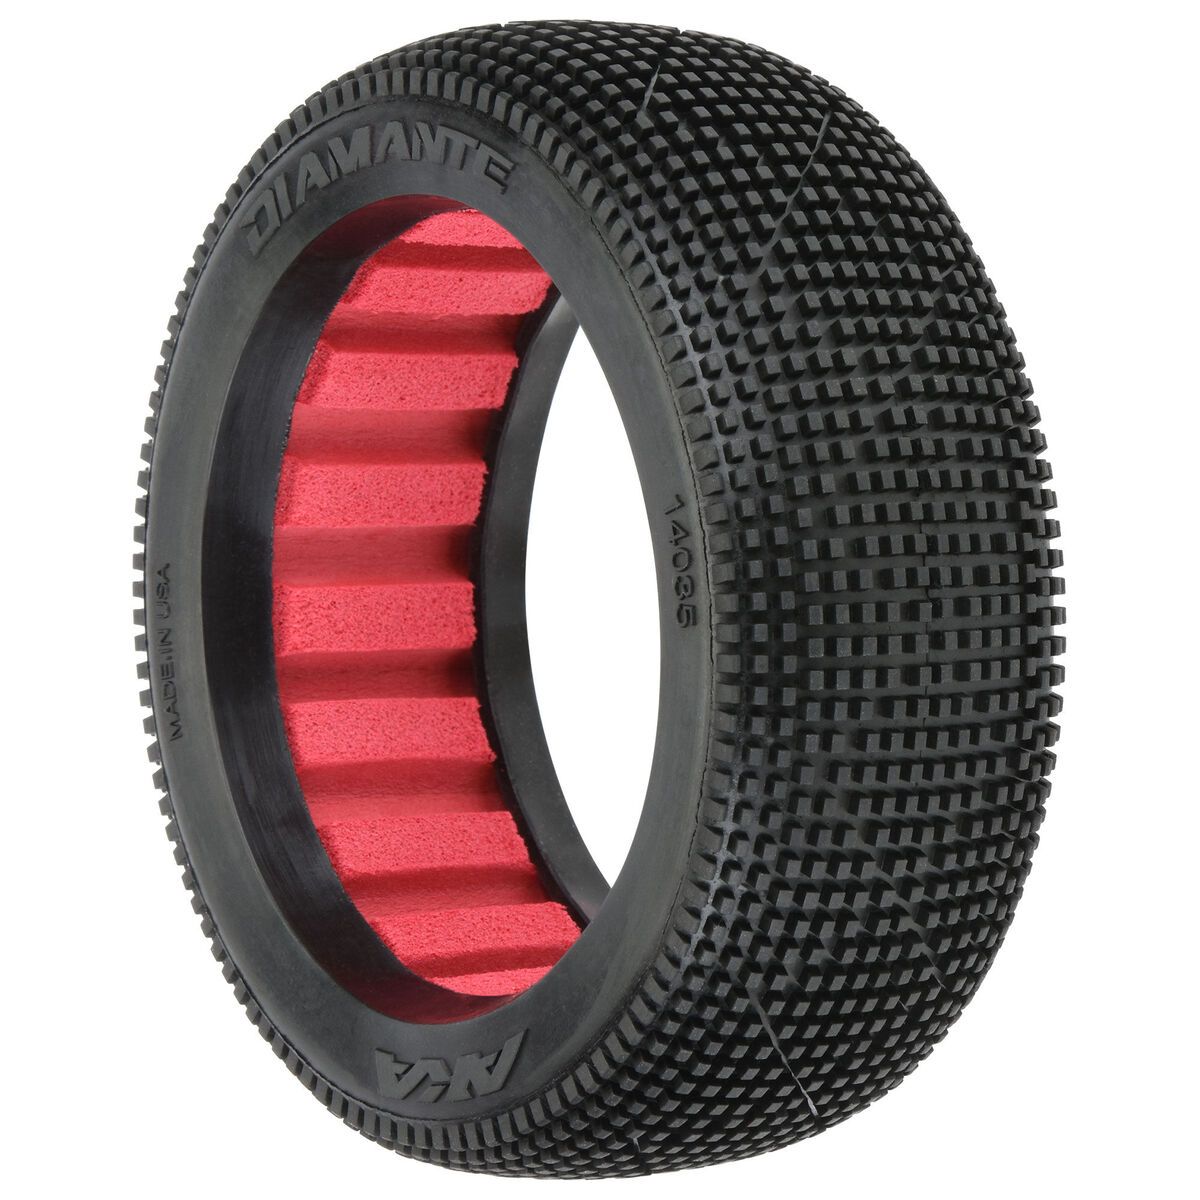 AKA Products, Inc. 14035CR 1:8 Diamante C Front/Rear Off-Road Buggy Tires